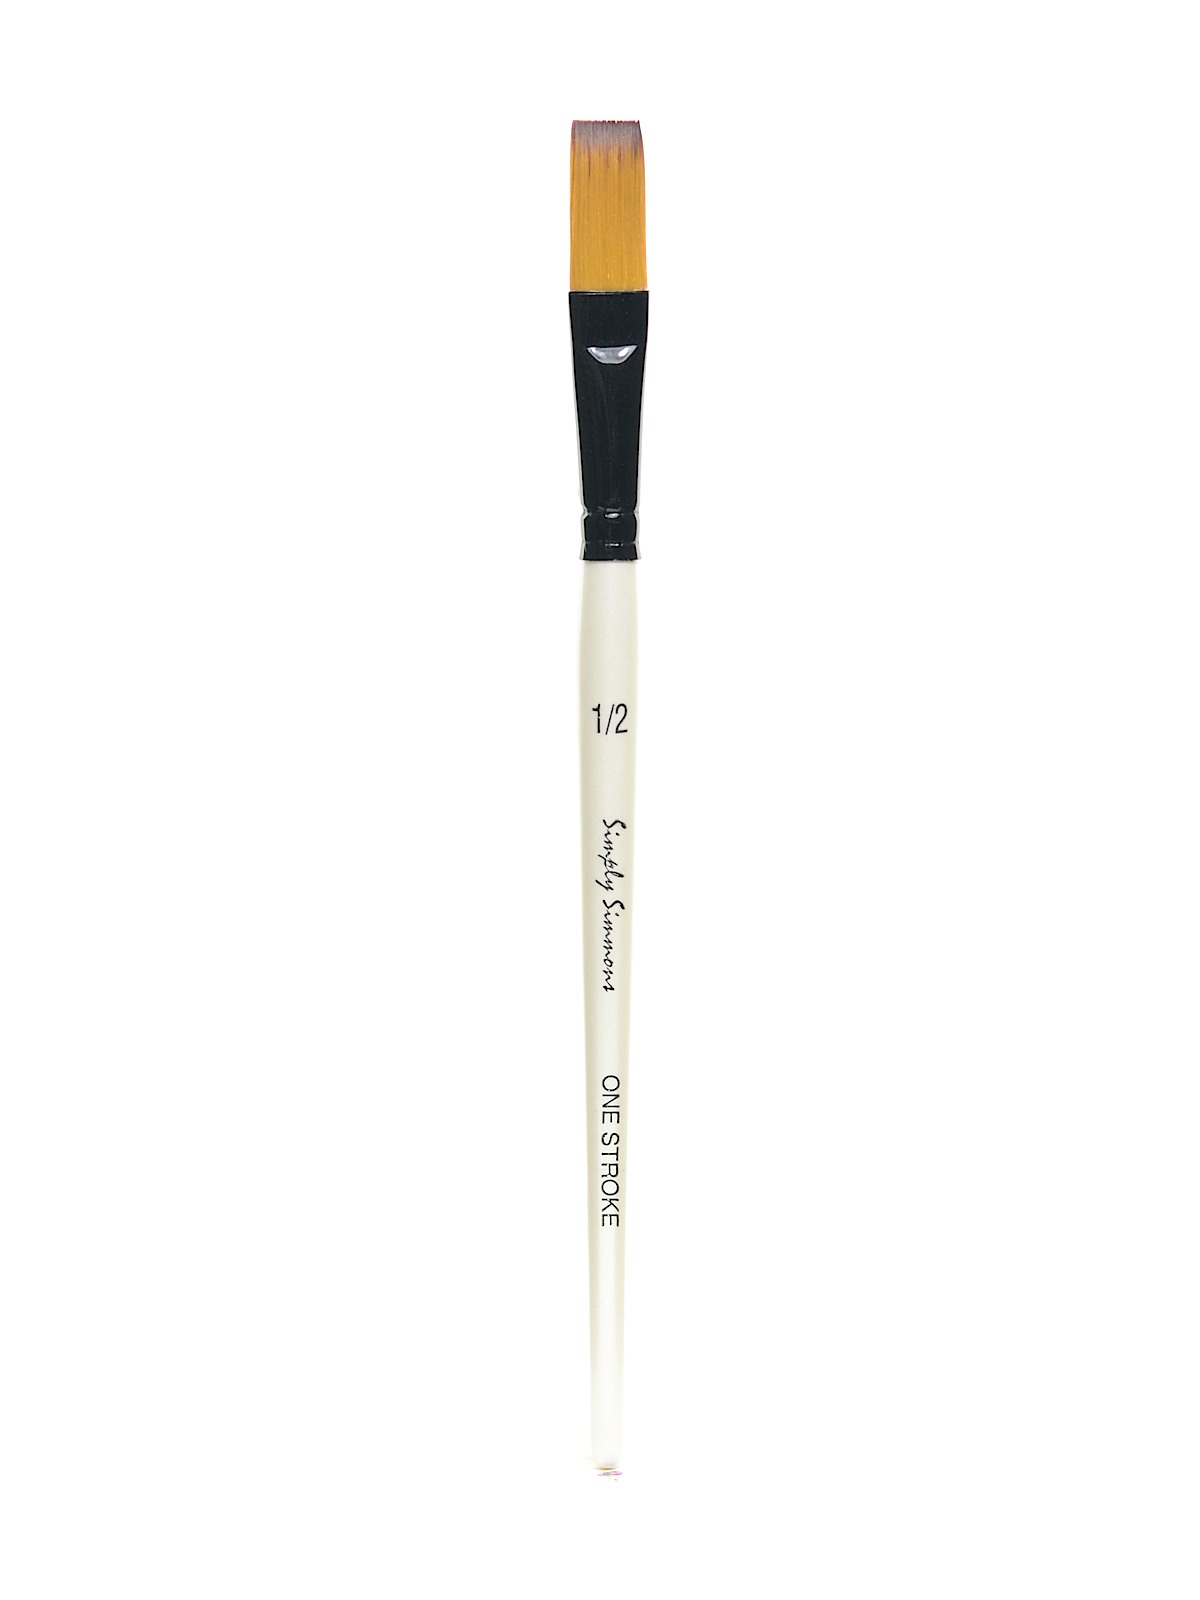 Simply Simmons Short Handle Brushes One Stroke 1 2 In.